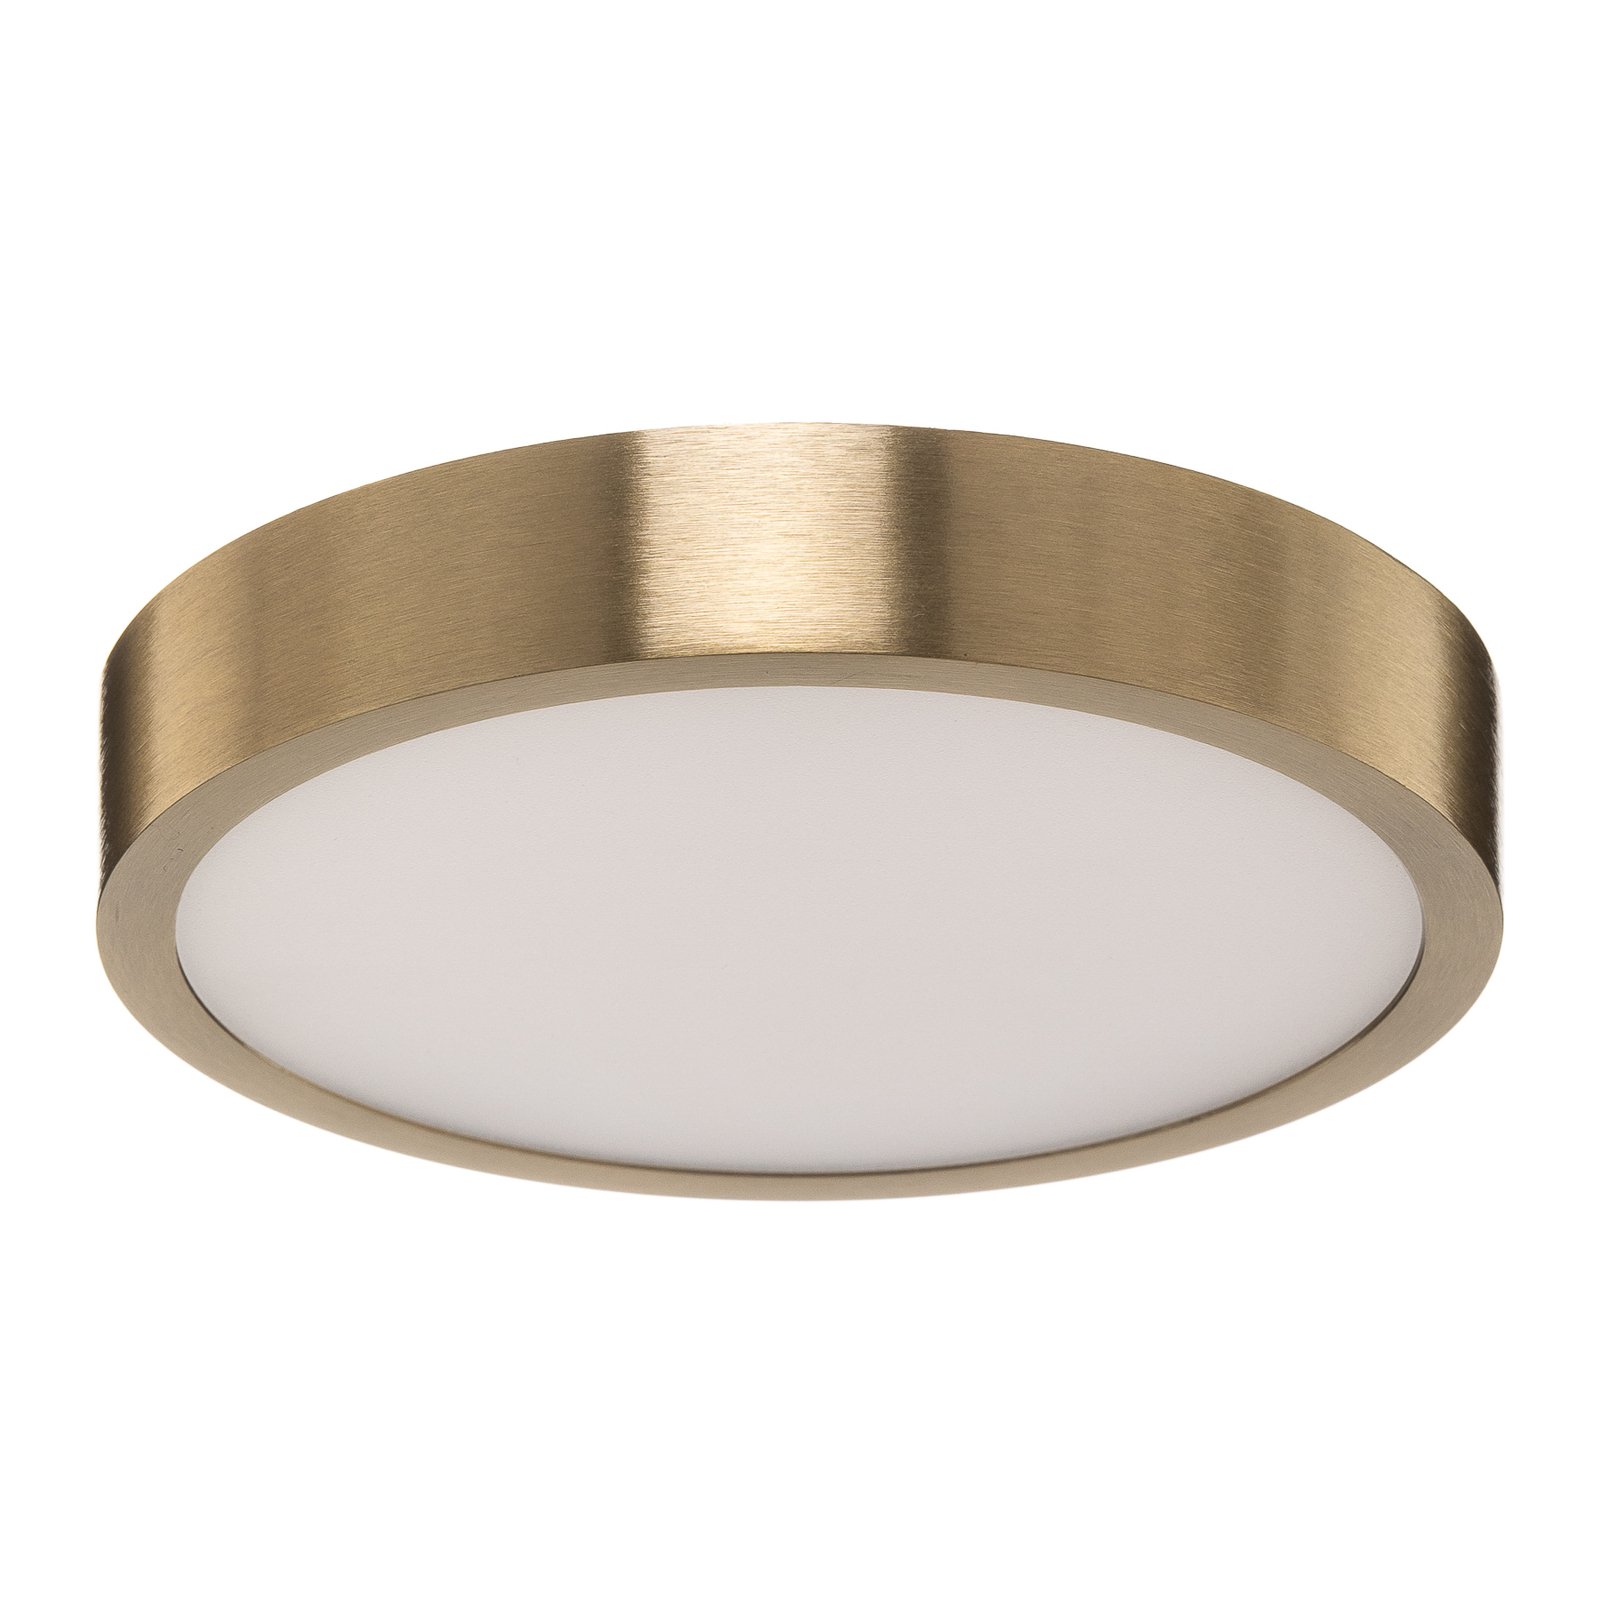 Bully LED ceiling light with patina look, Ø 14 cm